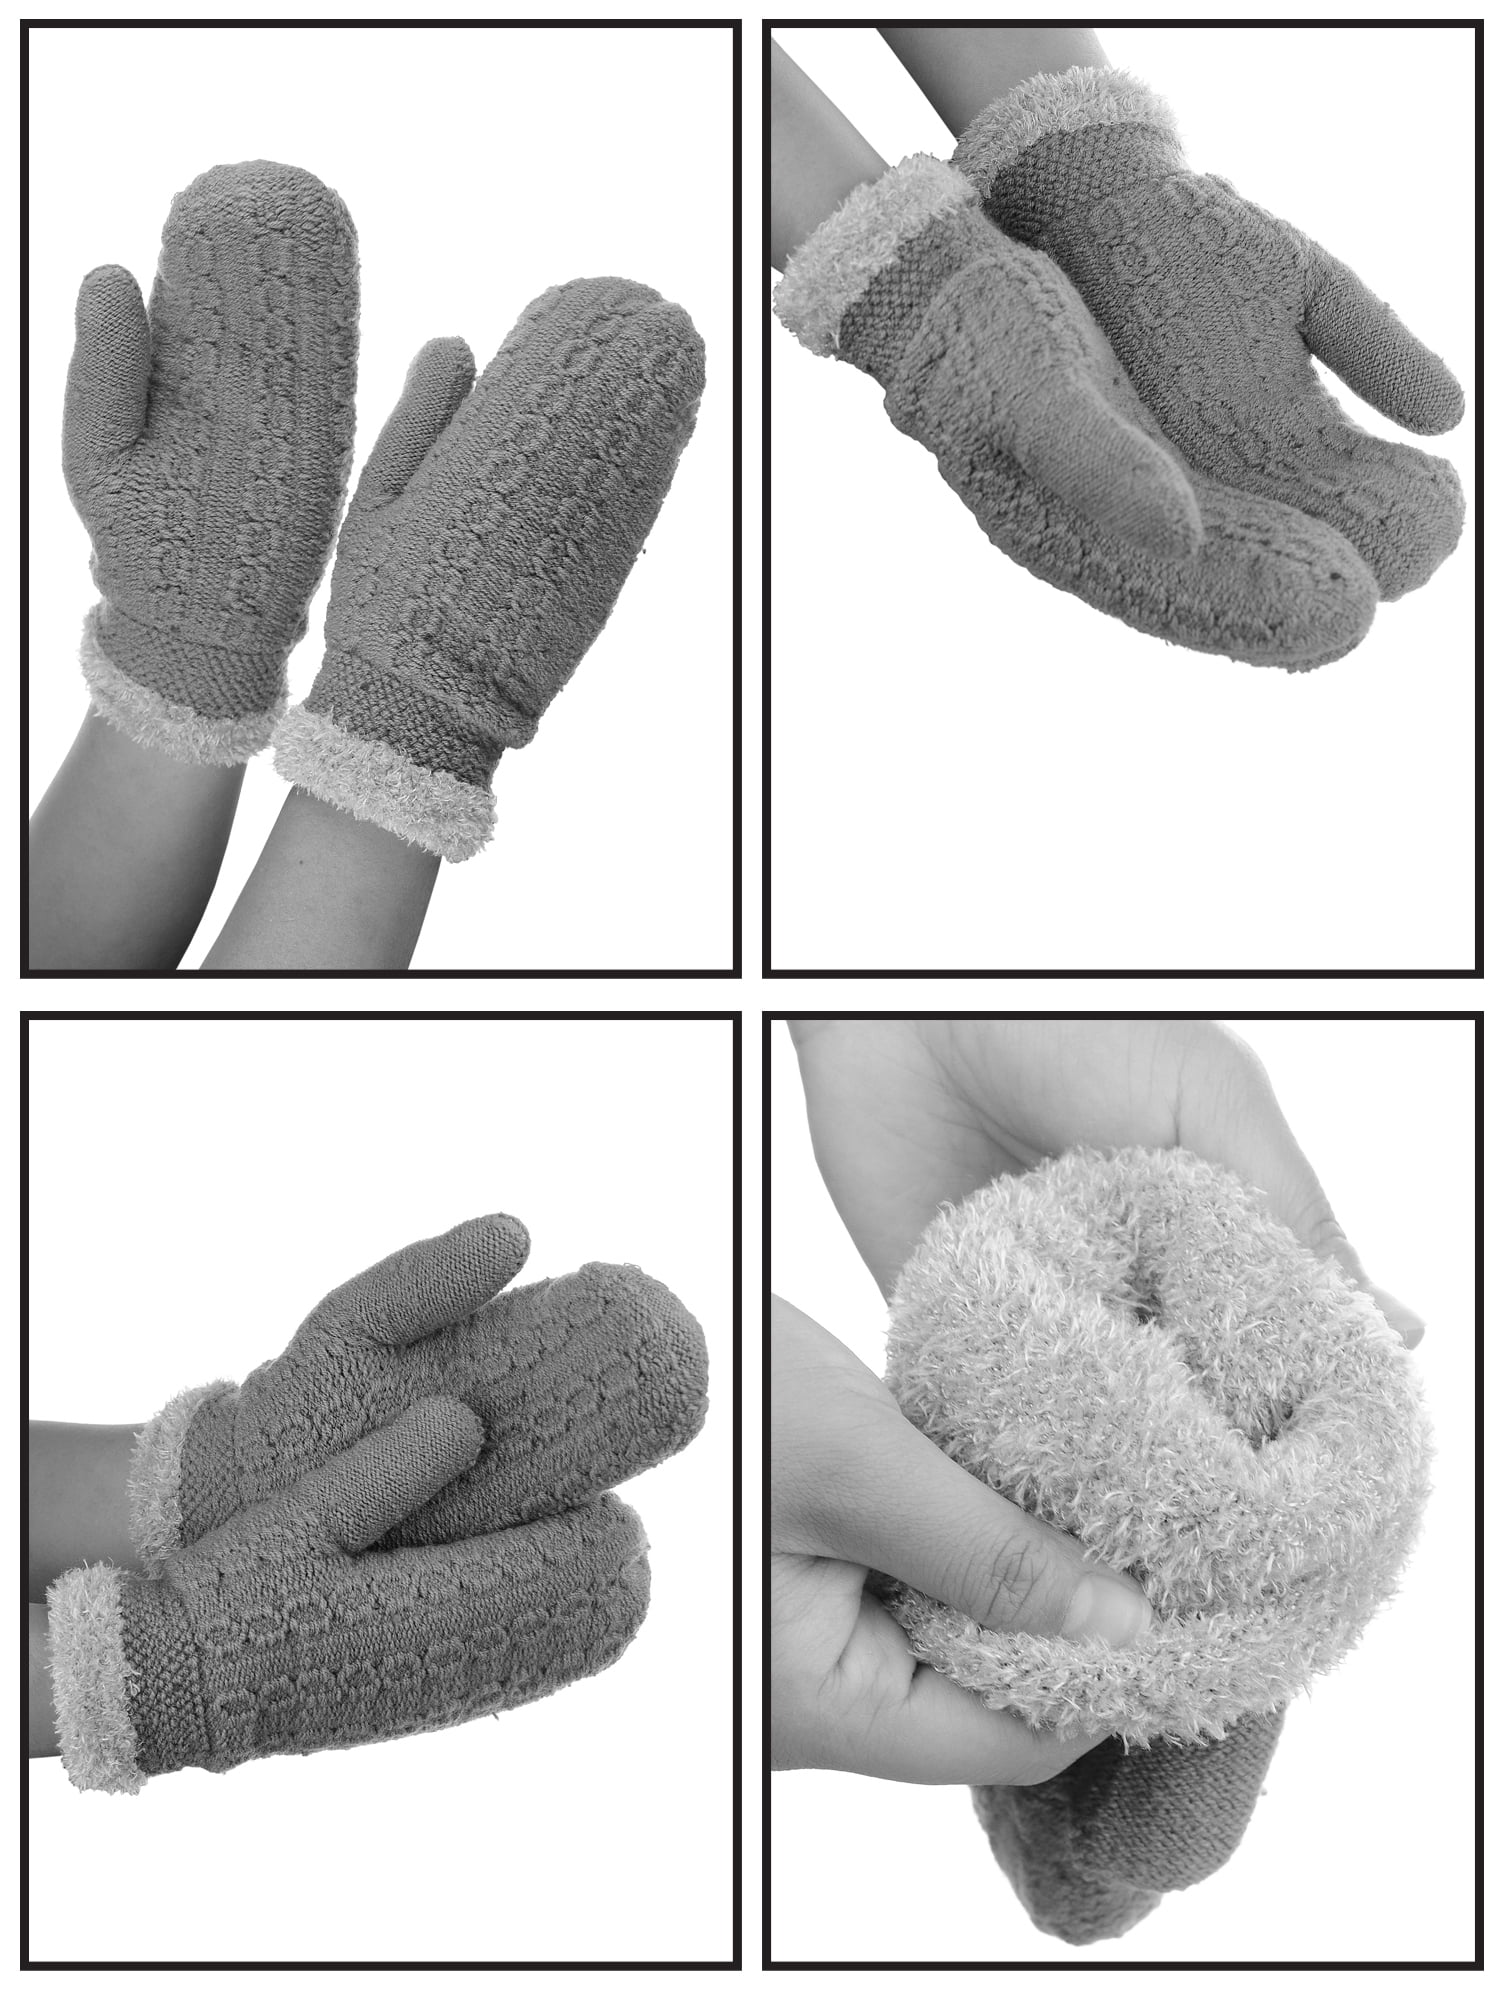 D&Y Womens Winter Warm Knit Plush Lined Stretchy Snug Fit Mittens